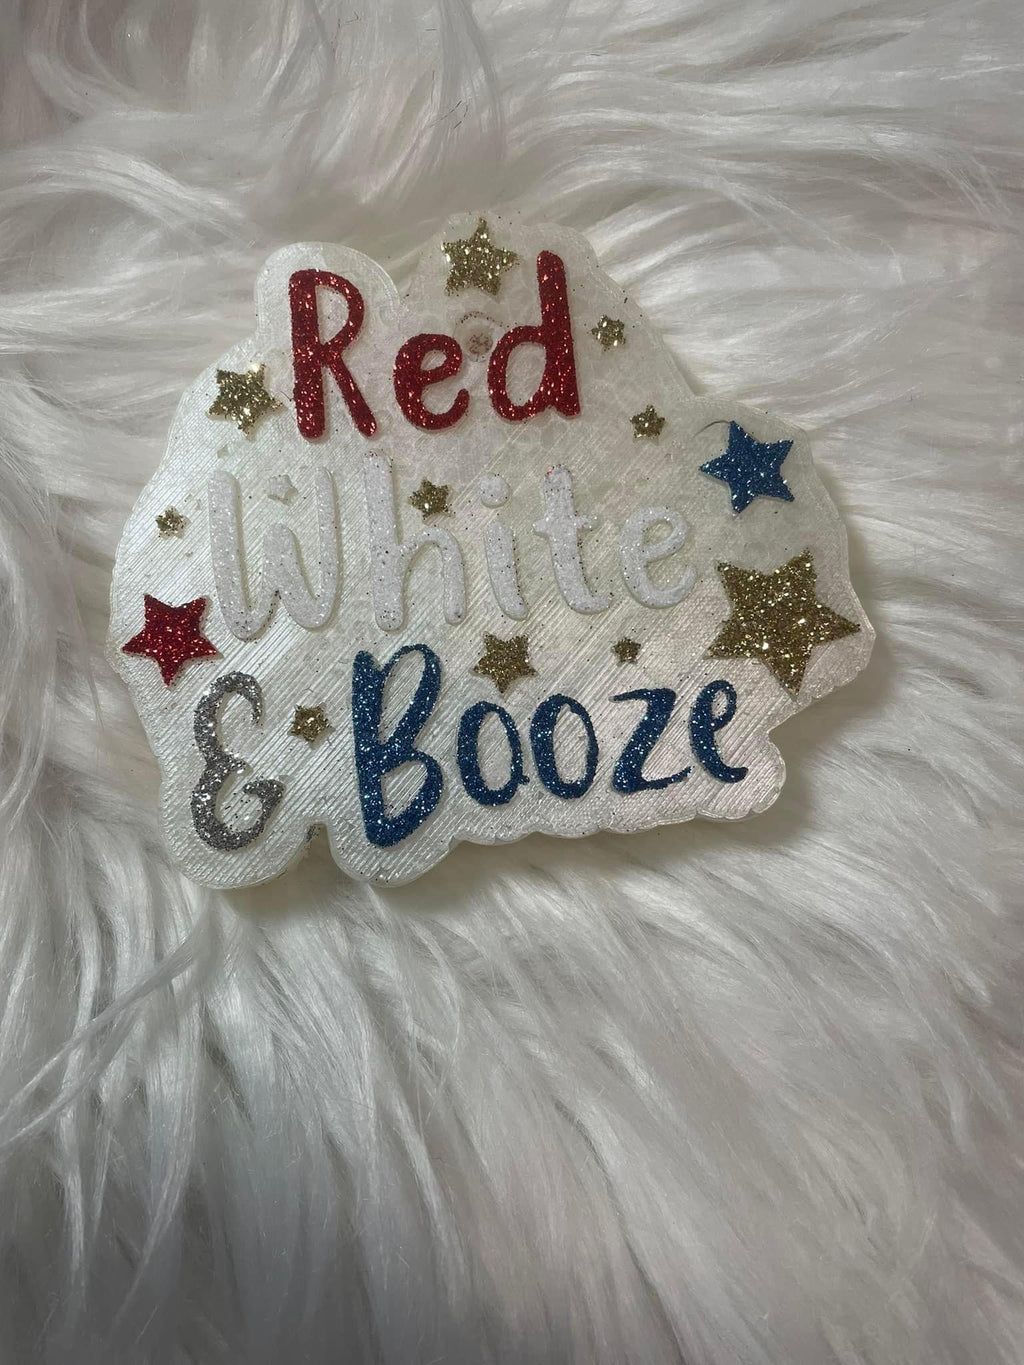 Red, White and Booze